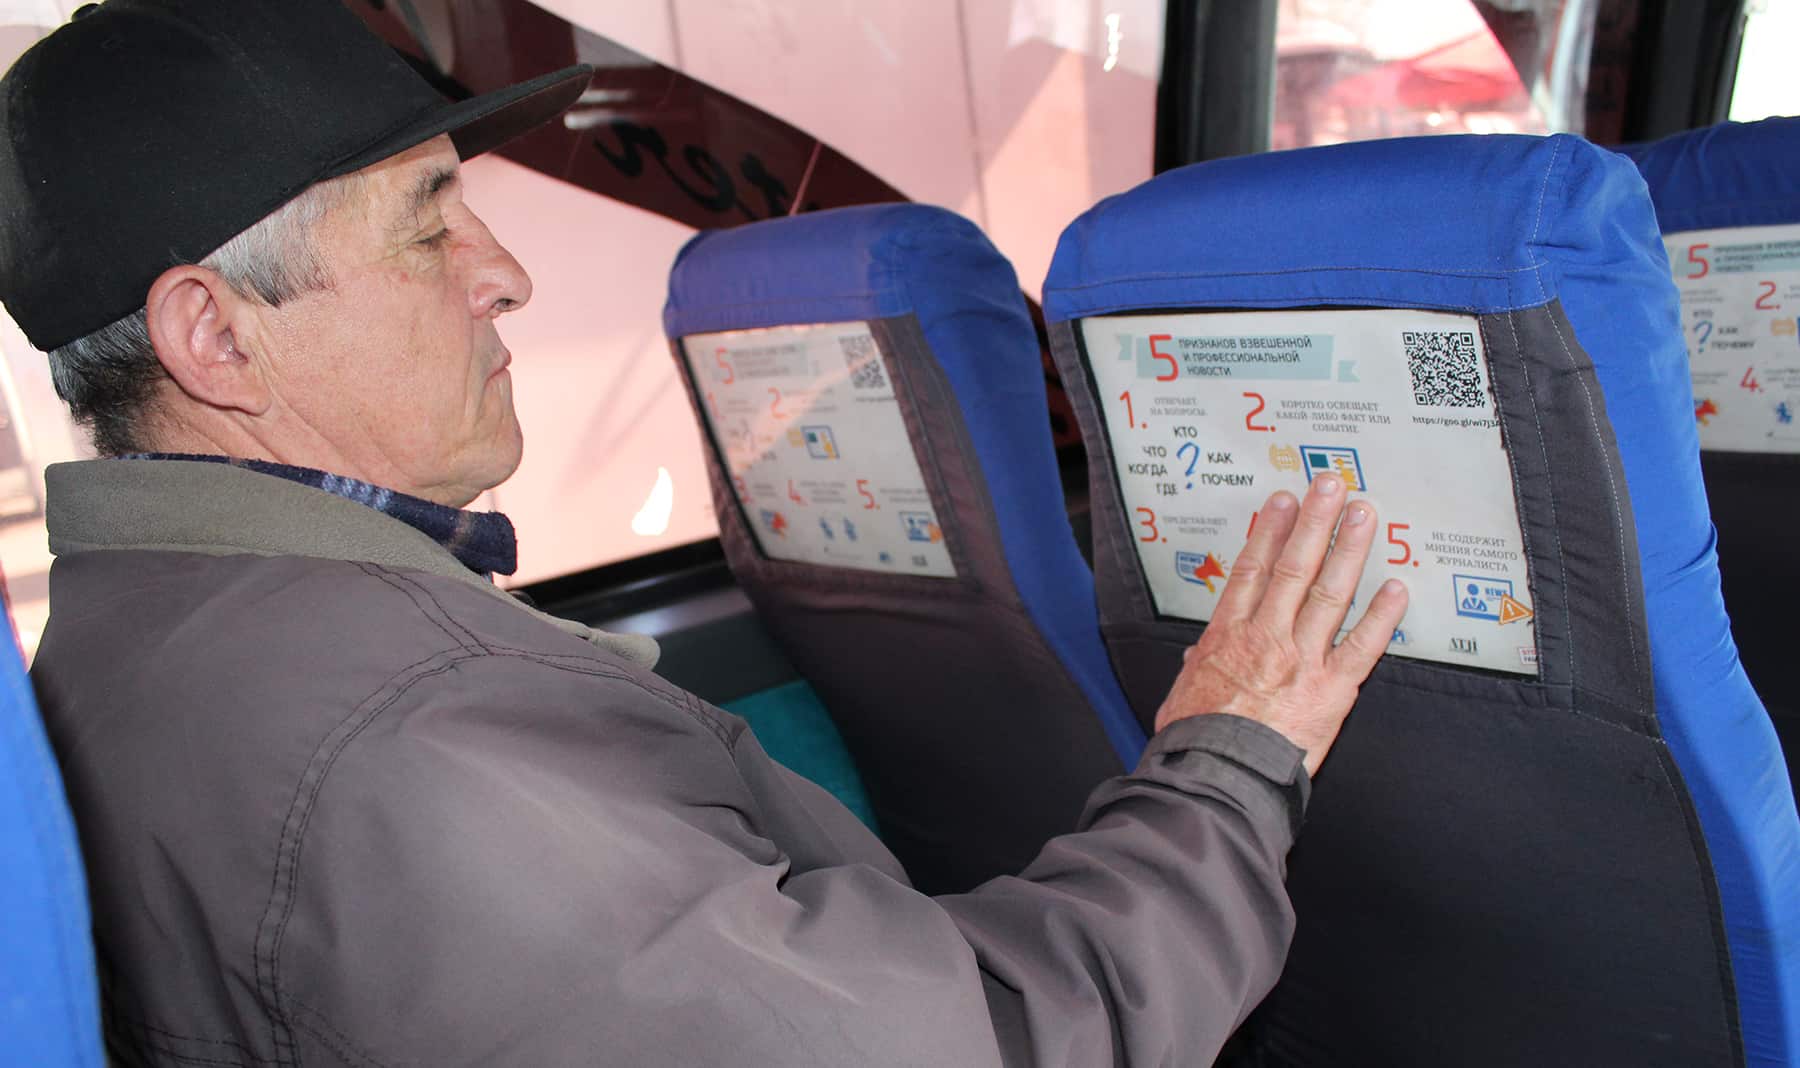 A man sitting on a bus reads the poster mounted on the seat in front of him.